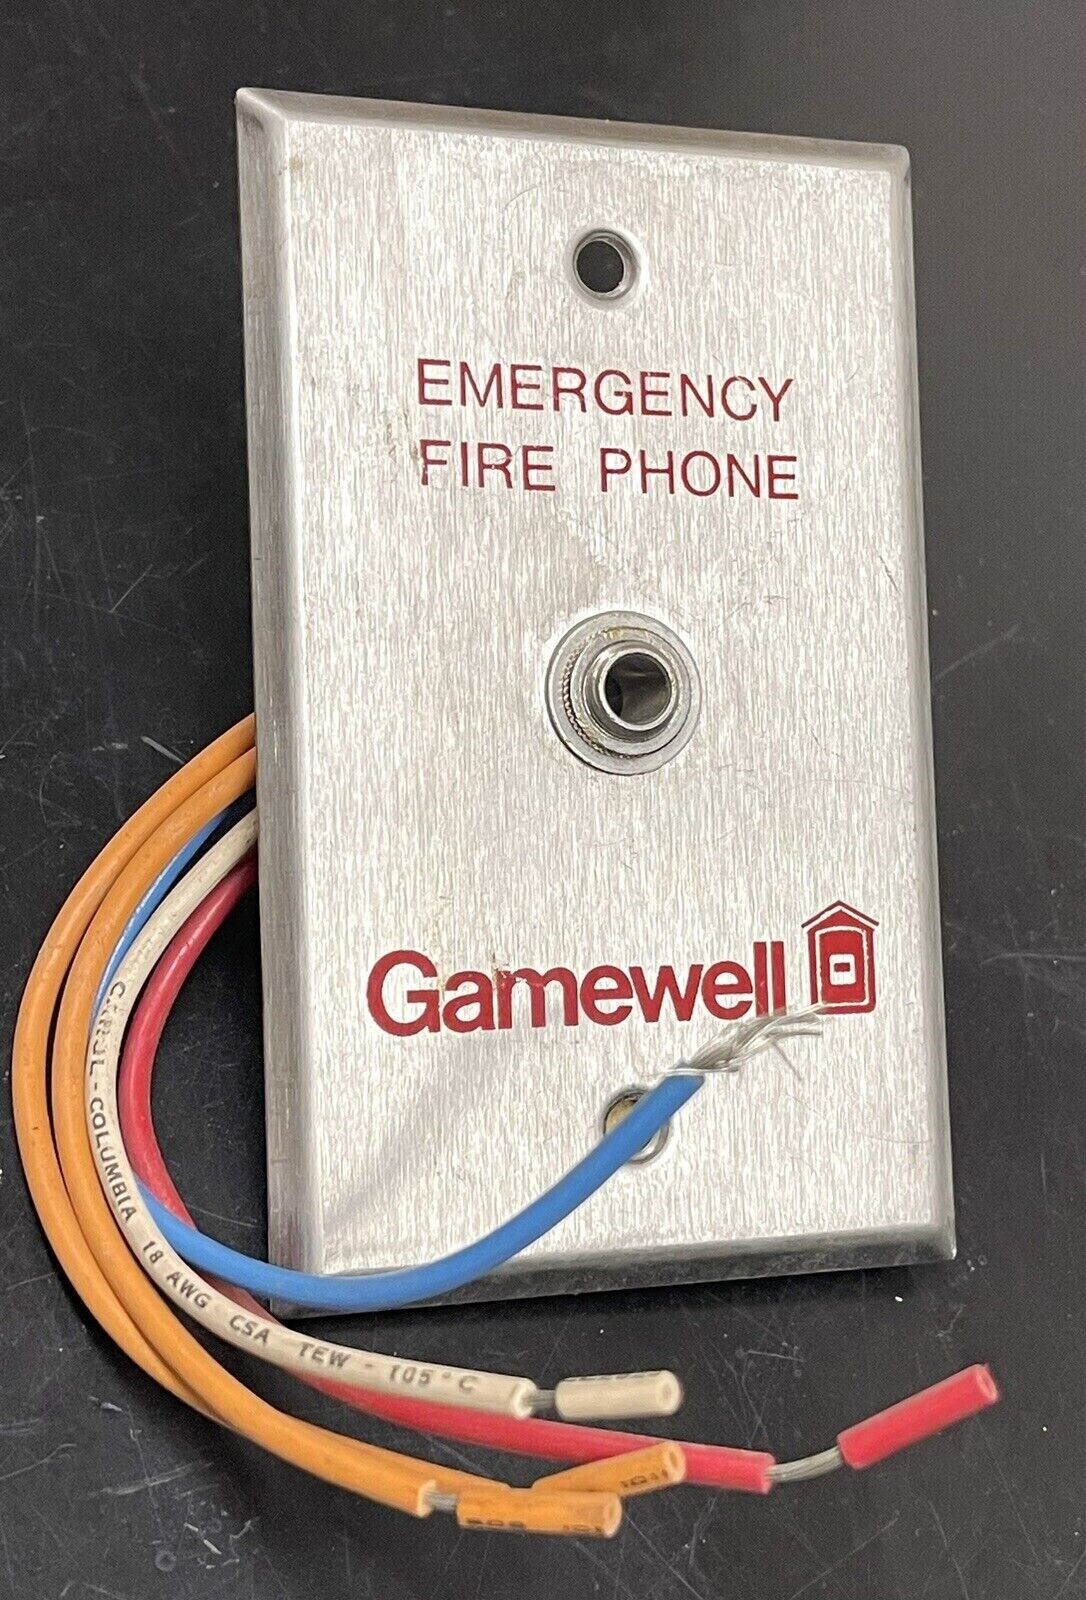 Gamewell 30045 Remote Phone Jack for Emergency Fire Phone